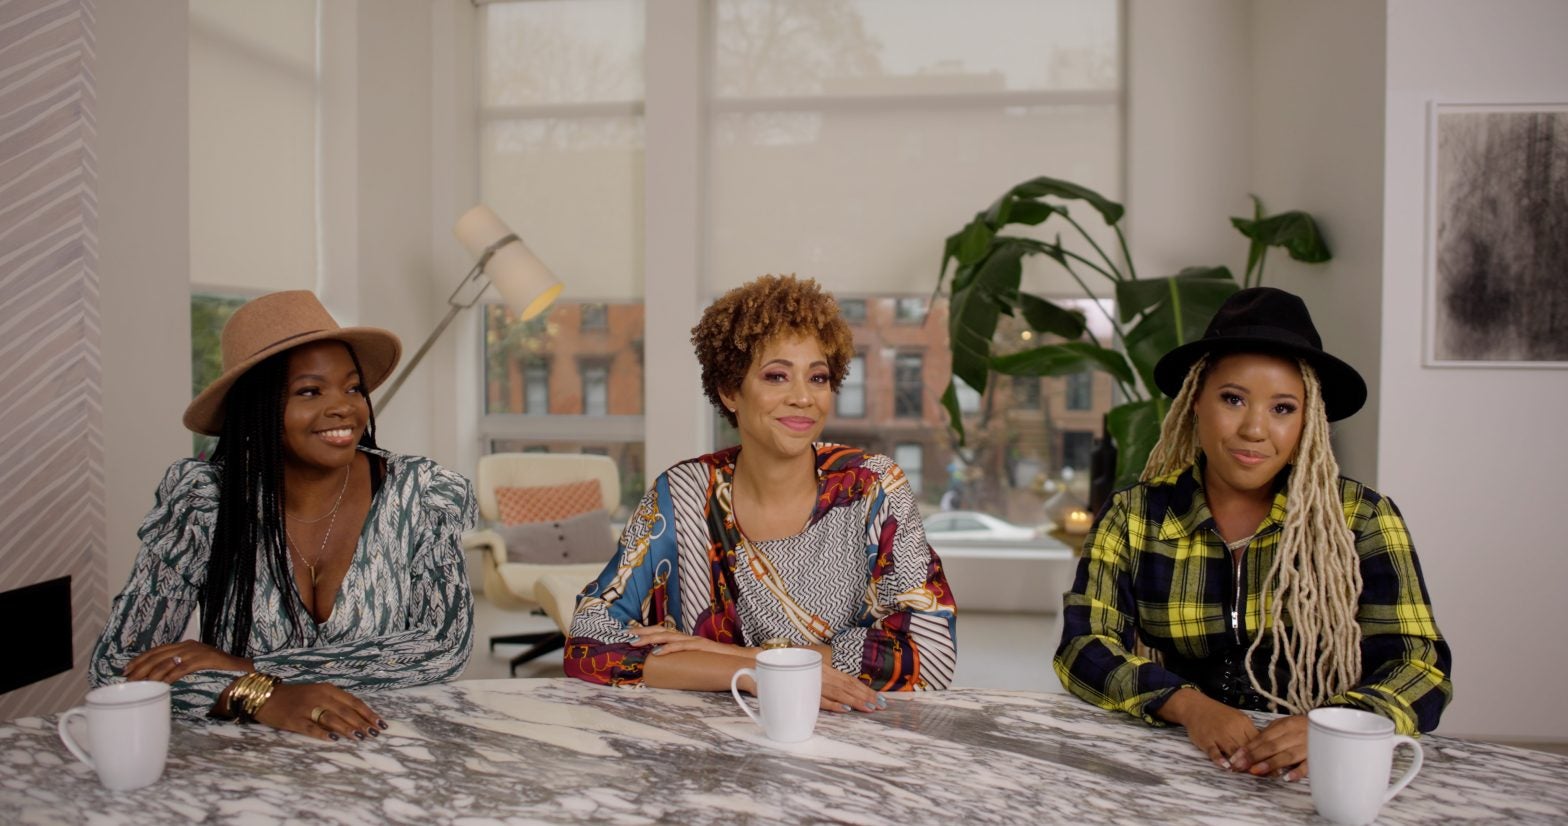 Essence Staff Discuss the Themes of Black Love and Family in 'A Journal For Jordan'